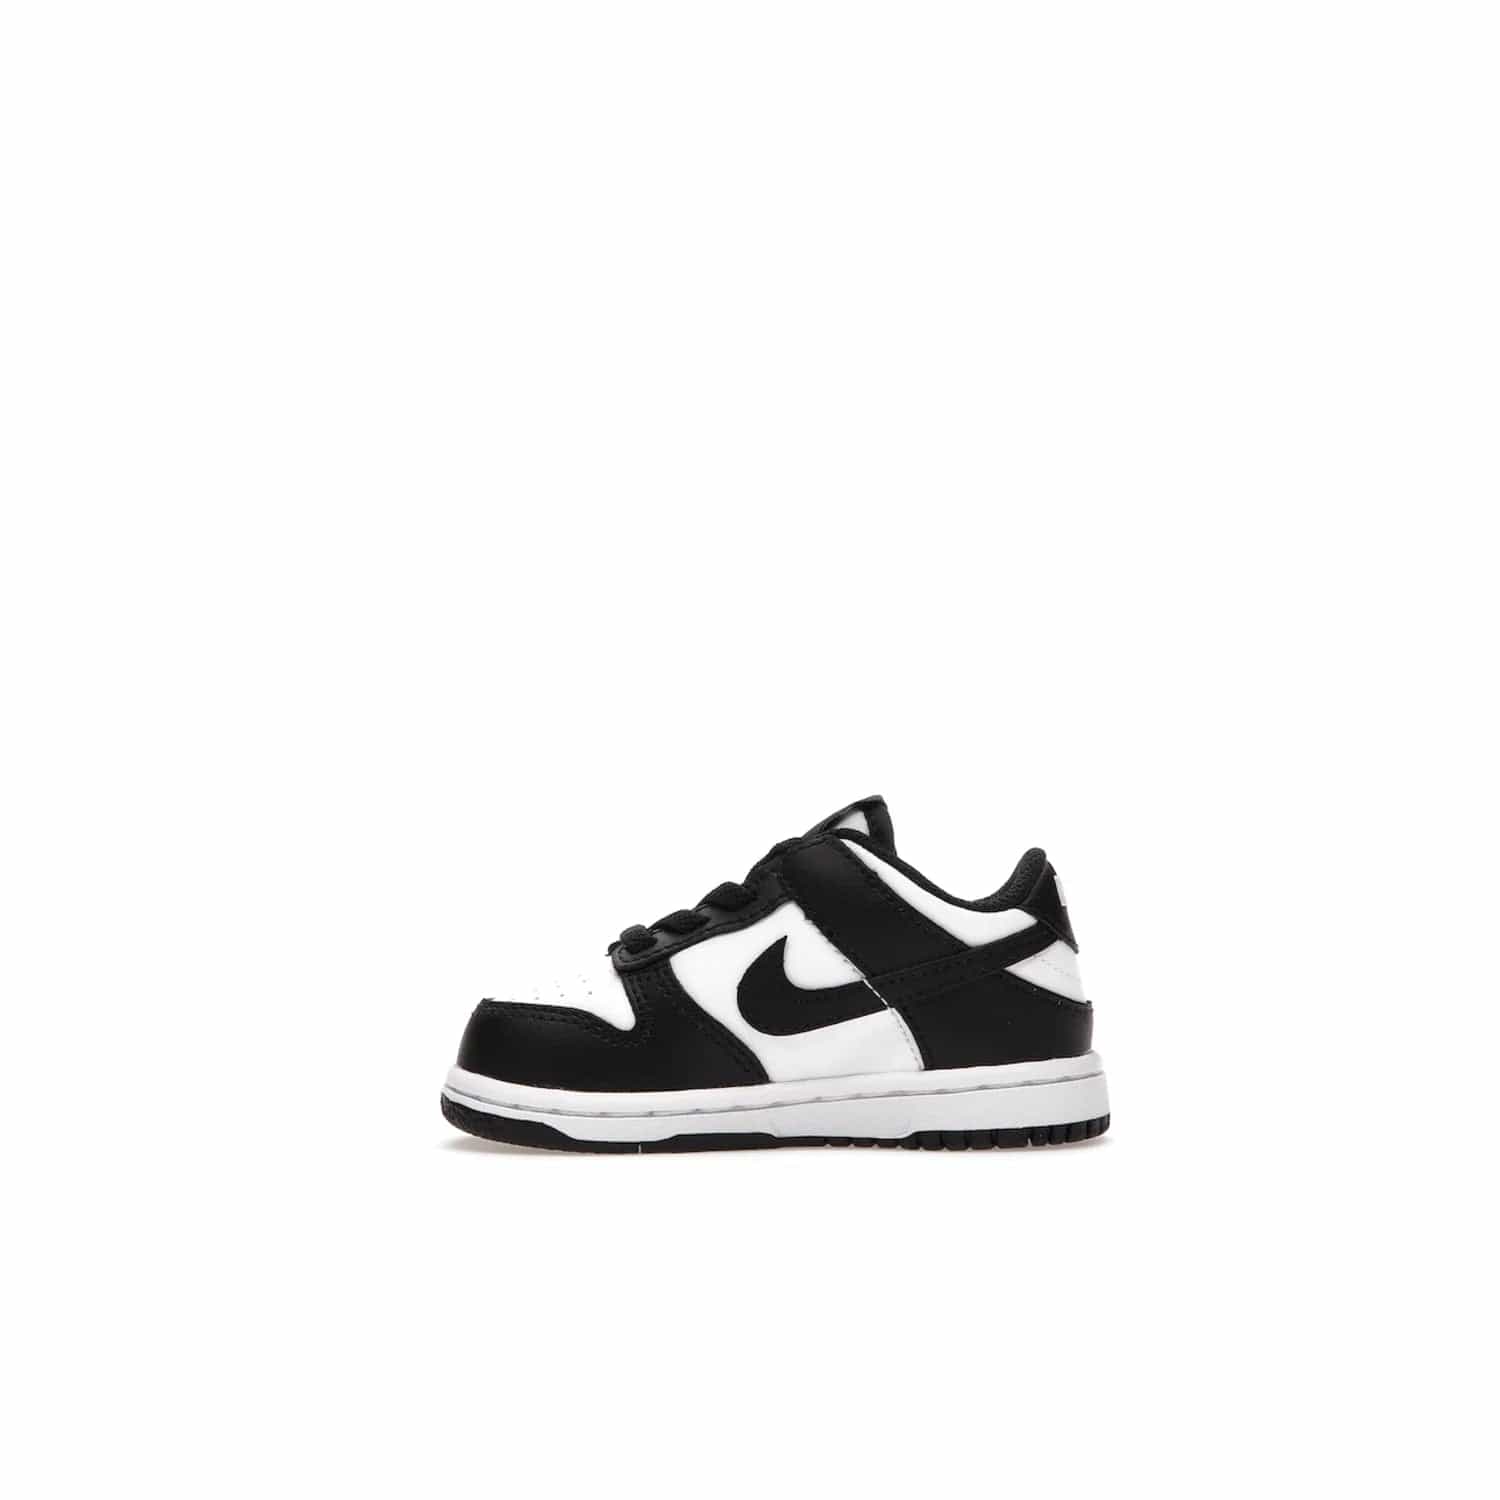 Nike Dunk Low Retro White Black Panda (2021) (TD) - Image 19 - Only at www.BallersClubKickz.com - The perfect blend of classic style and modern style, the Nike Dunk Low Retro White Black (TD) toddler shoe has a soft leather upper, white midsole, and black outsole. Signature Swoosh branding and lightly padded tongue give it timeless Nike style. Released in March 2021.